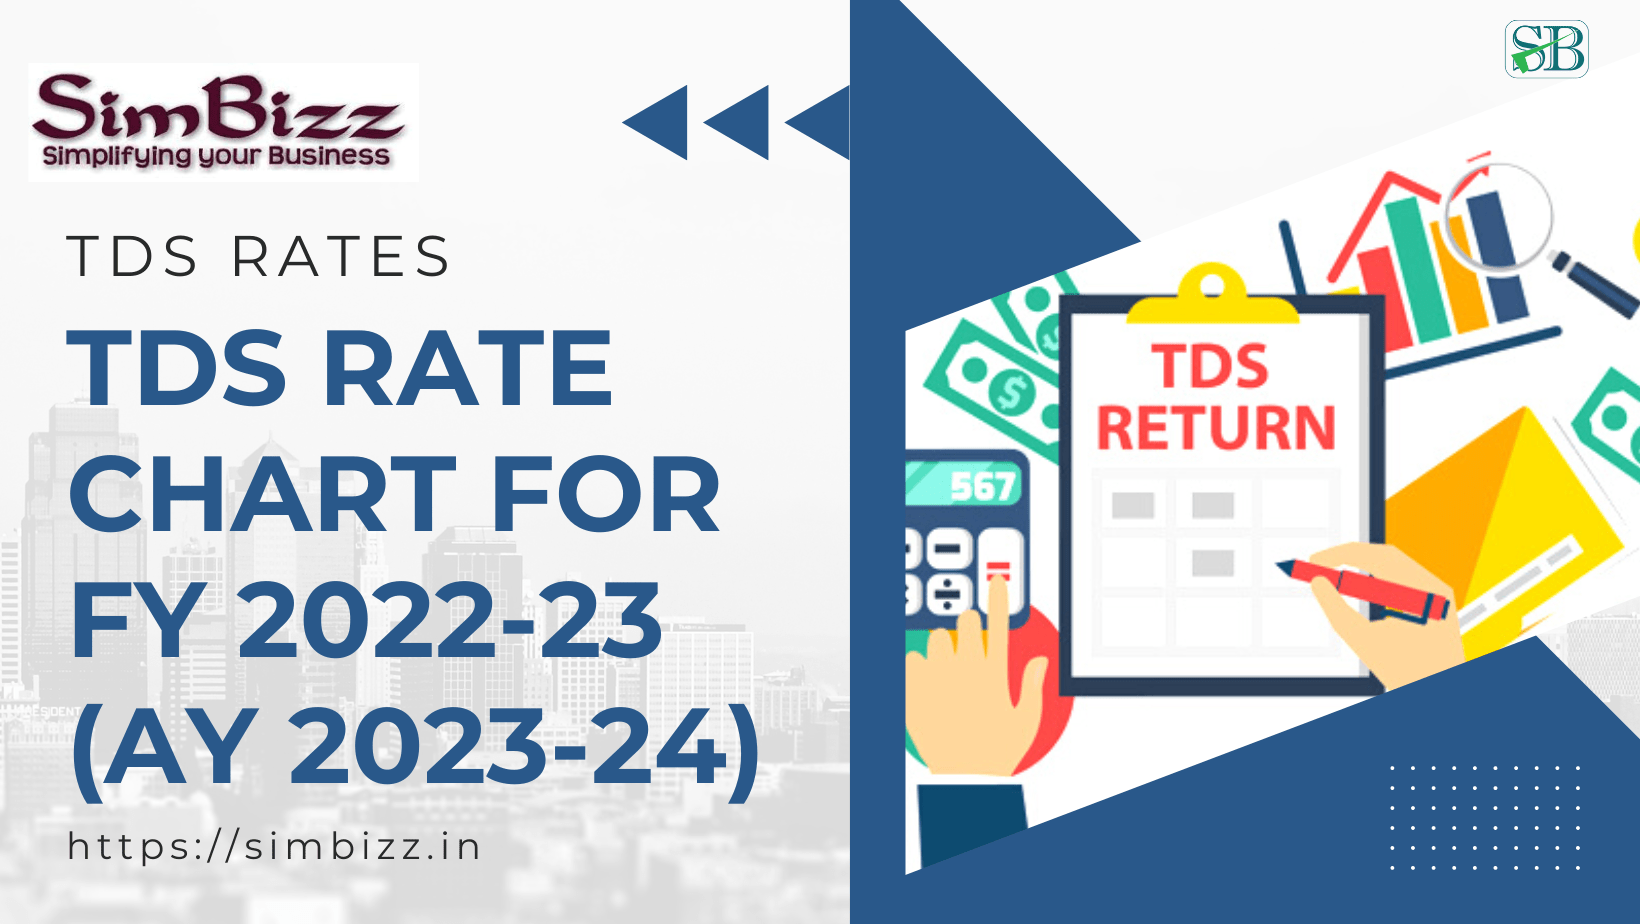 Tds Rate Chart For Fy 2022 23 Ay 2023 24 Simbizz 8263